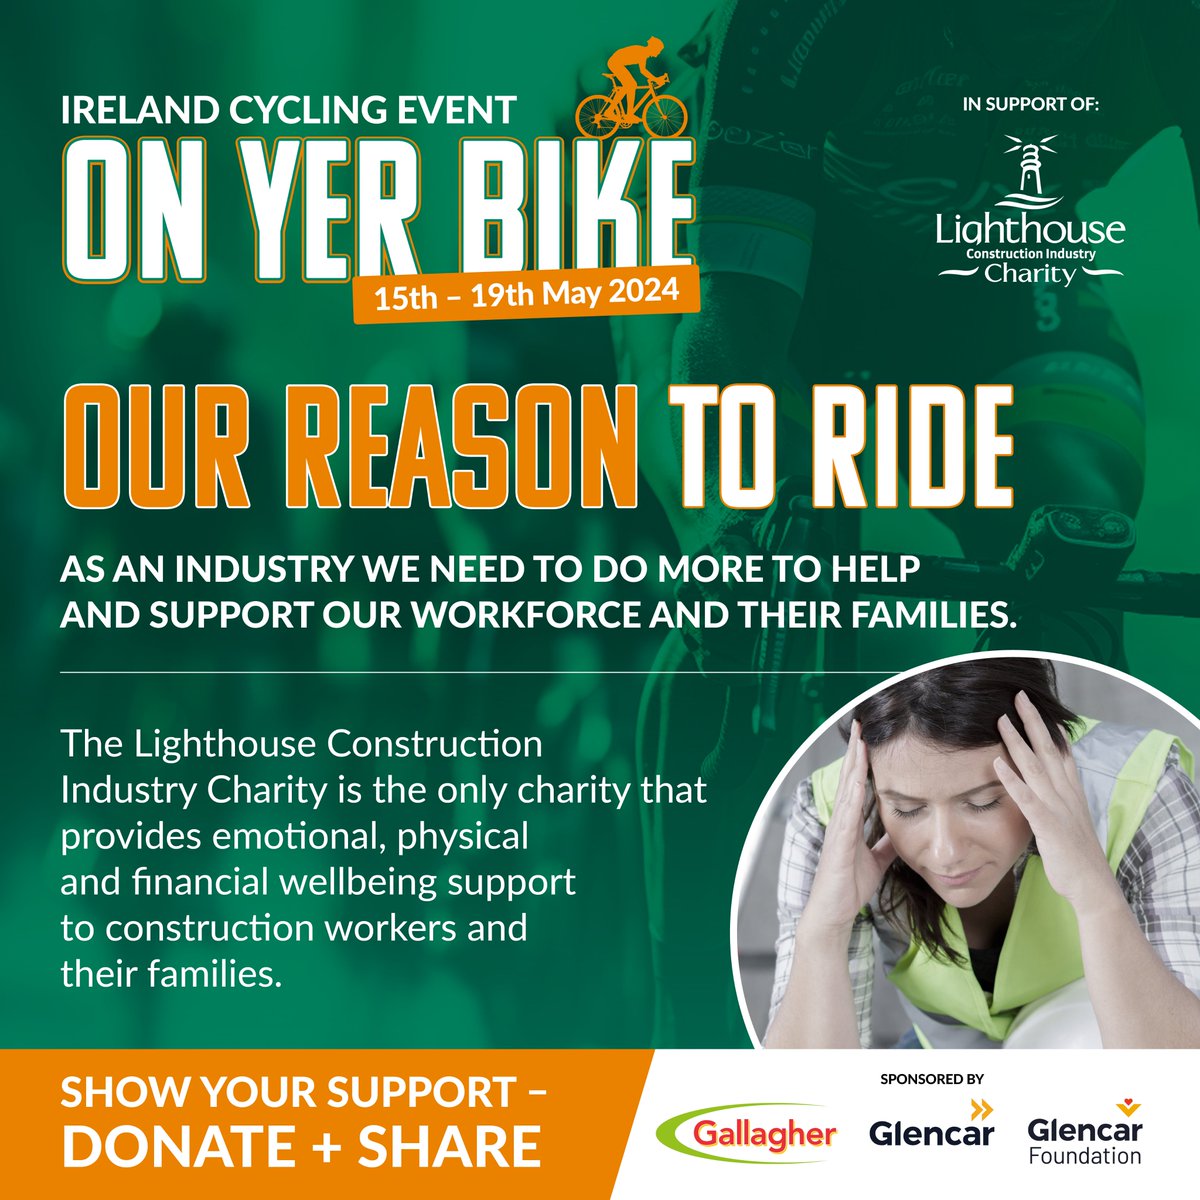 Support our cyclists in the On Yer Bike challenge, raising £200,000 for The Lighthouse Club! Every pound makes a difference. Join us in backing them! bit.ly/GallagherOYB  #cyclechallenge #lighthouseclub #GallagherGroup #charitycycle